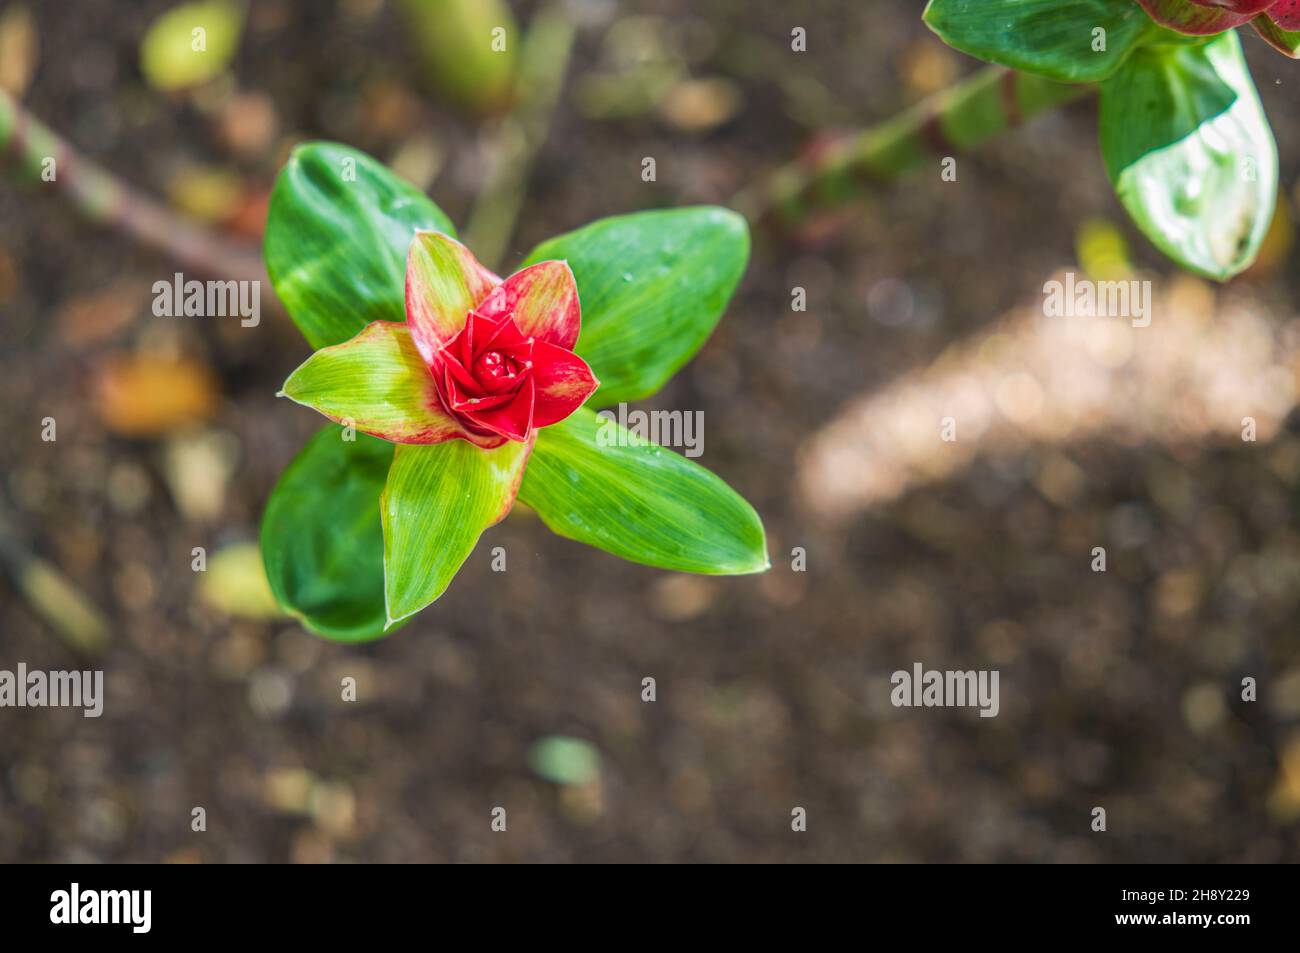 Beautiful view of best ornamental gingers Costus comosus Red Tower flower. Beautiful nature backgrounds. Sweden. Stock Photo